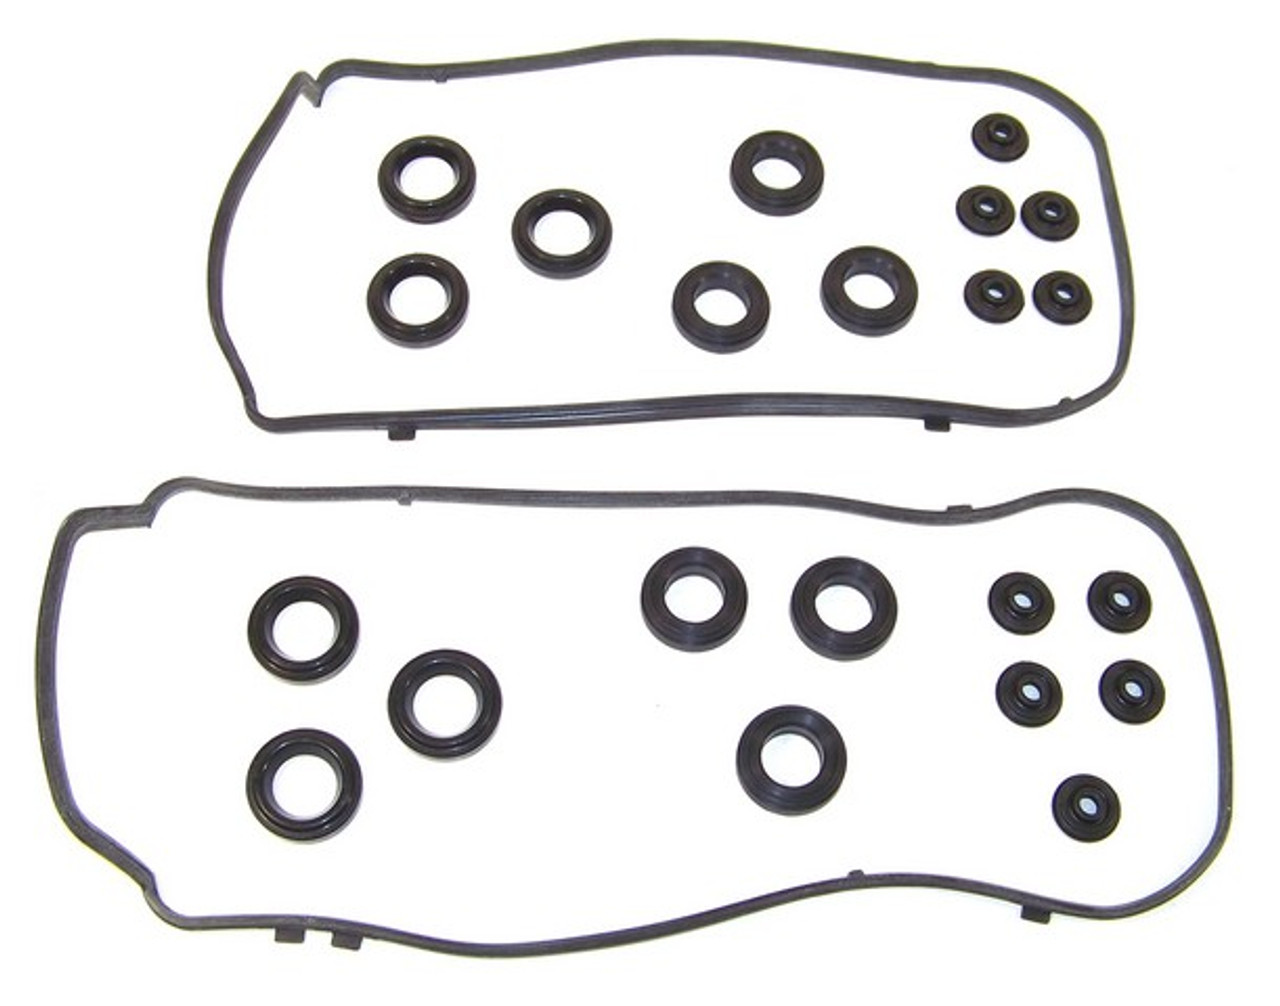 Valve Cover Gasket Set 3.5L 2009 Acura TL - VC268G.14